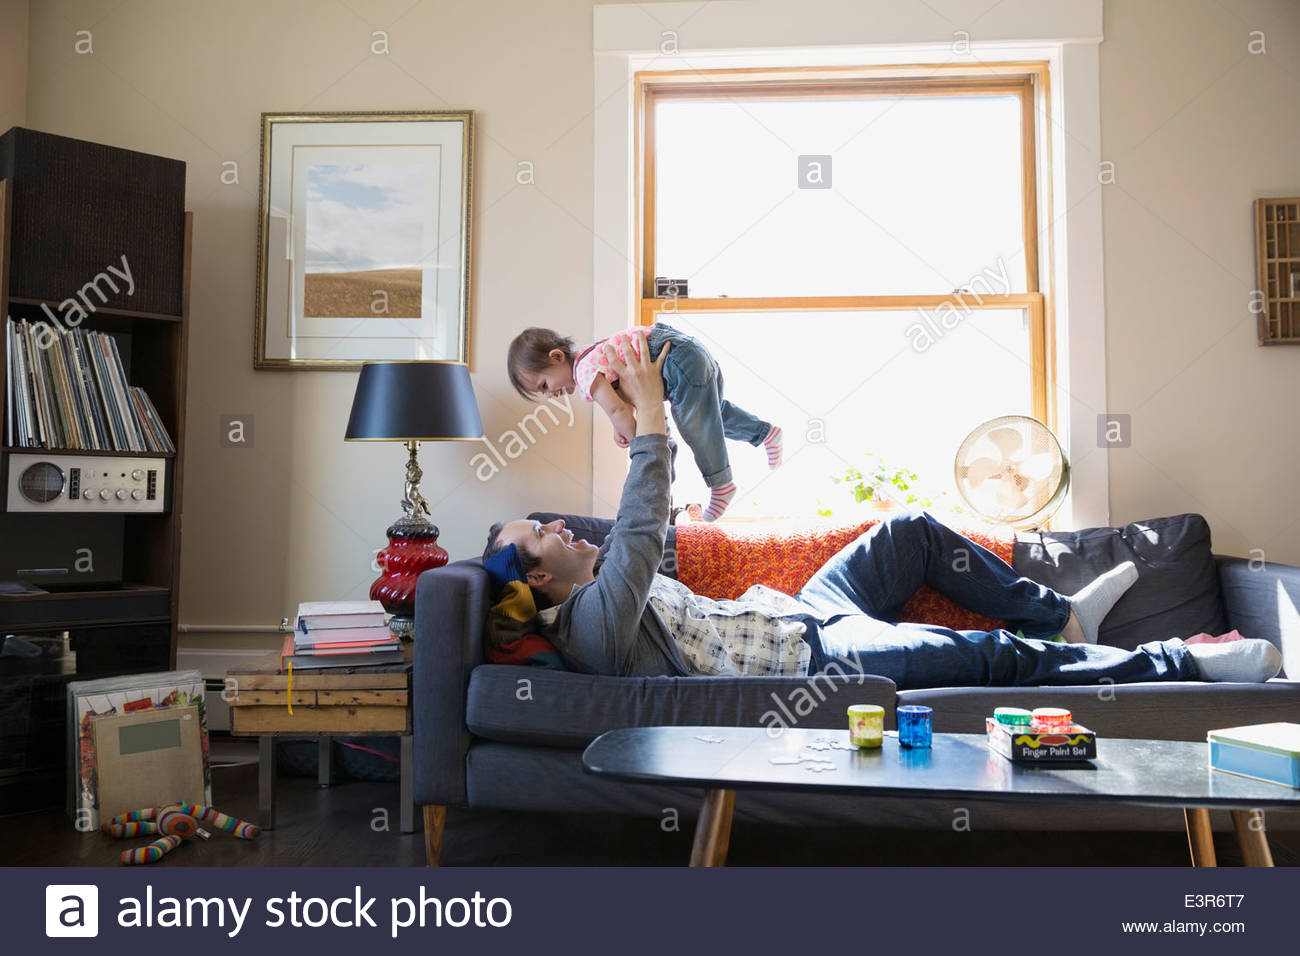 Father lifting baby daughter overhead on sofa Stock Photo